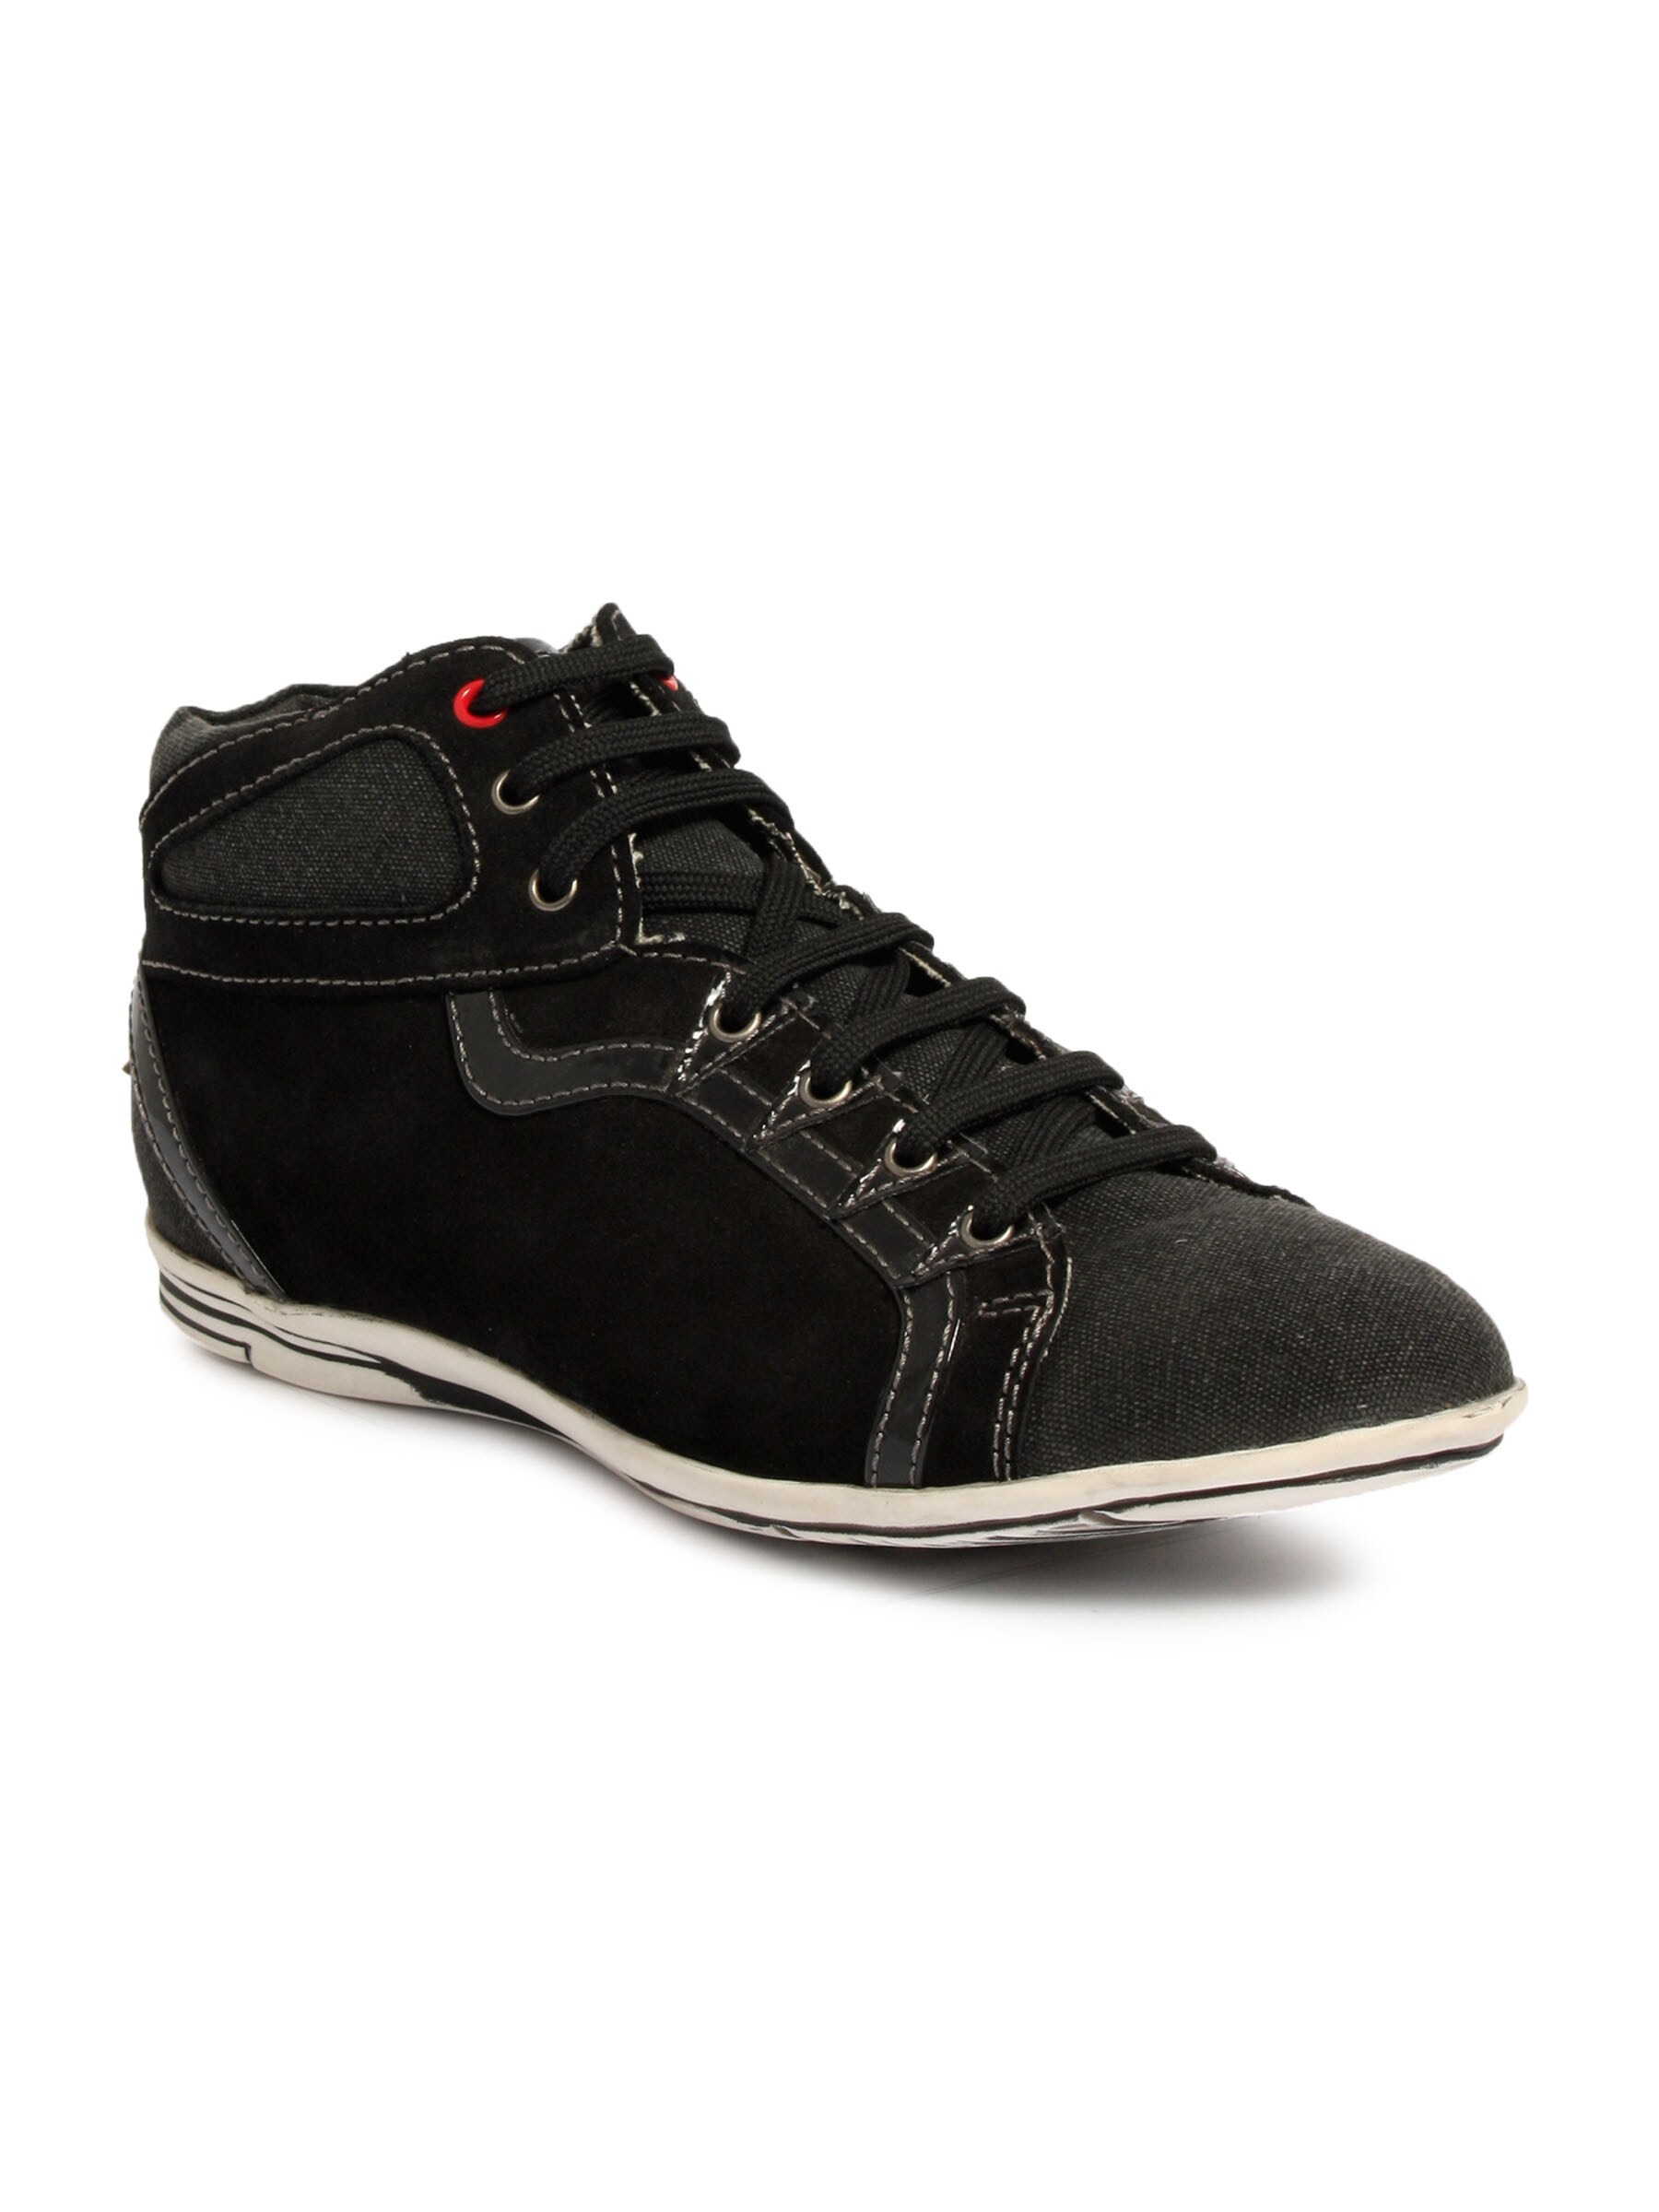 Flying Machine Men Casual Black Casual Shoes